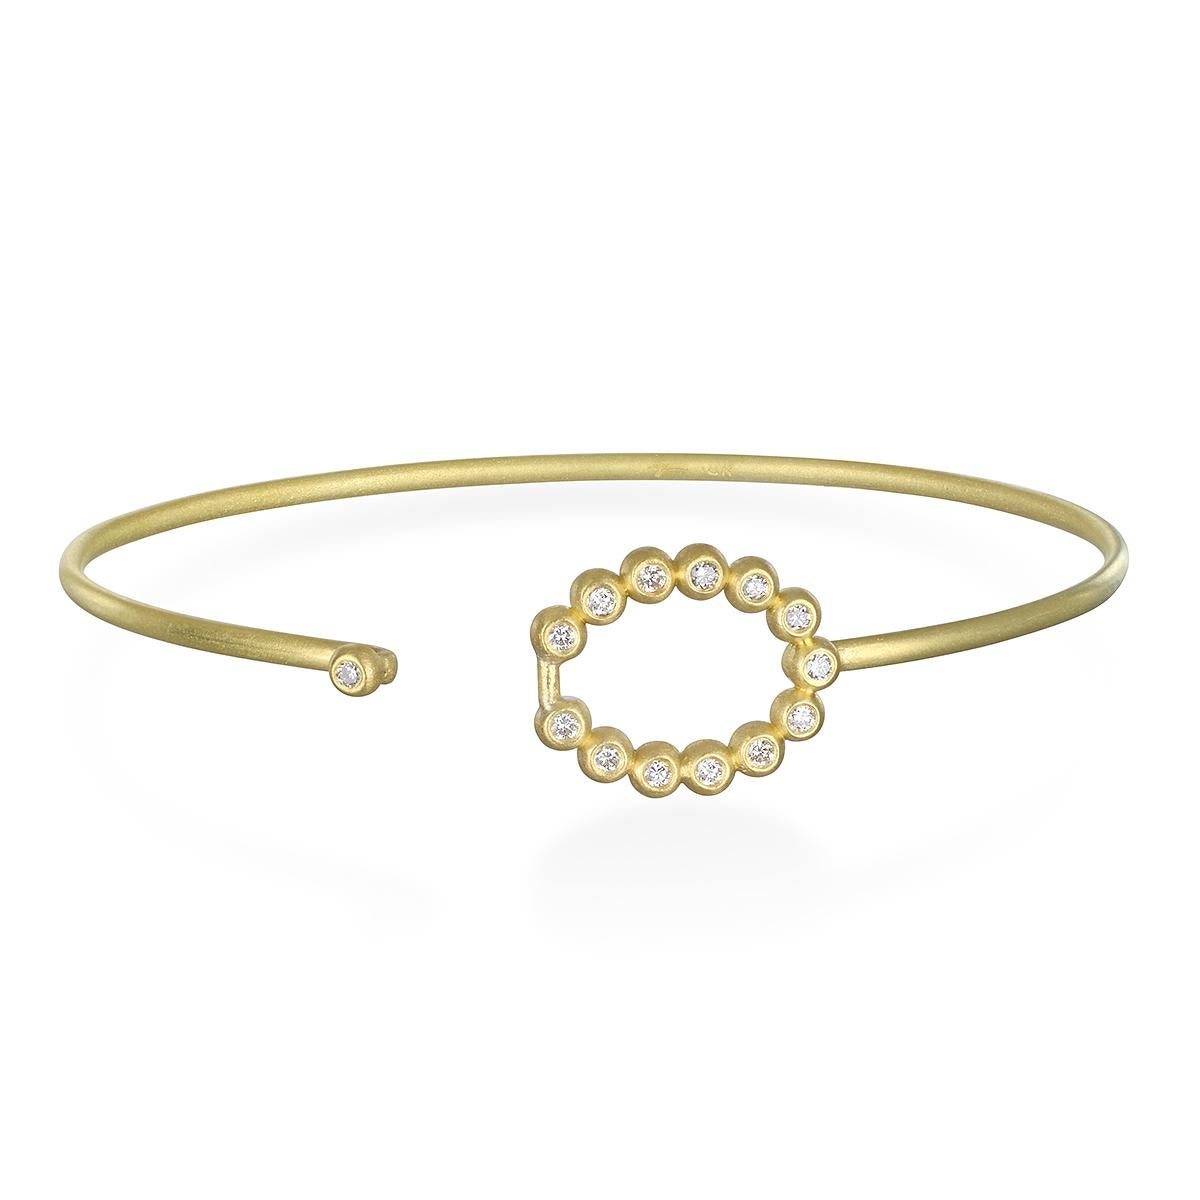 Understated beauty! Faye Kim's handcrafted in 18k gold, the Oval diamond motif doubles as the clasp. Perfect to wear on its own or great to stack with other bangles.

Bangle Dimensions: LxW 2.5